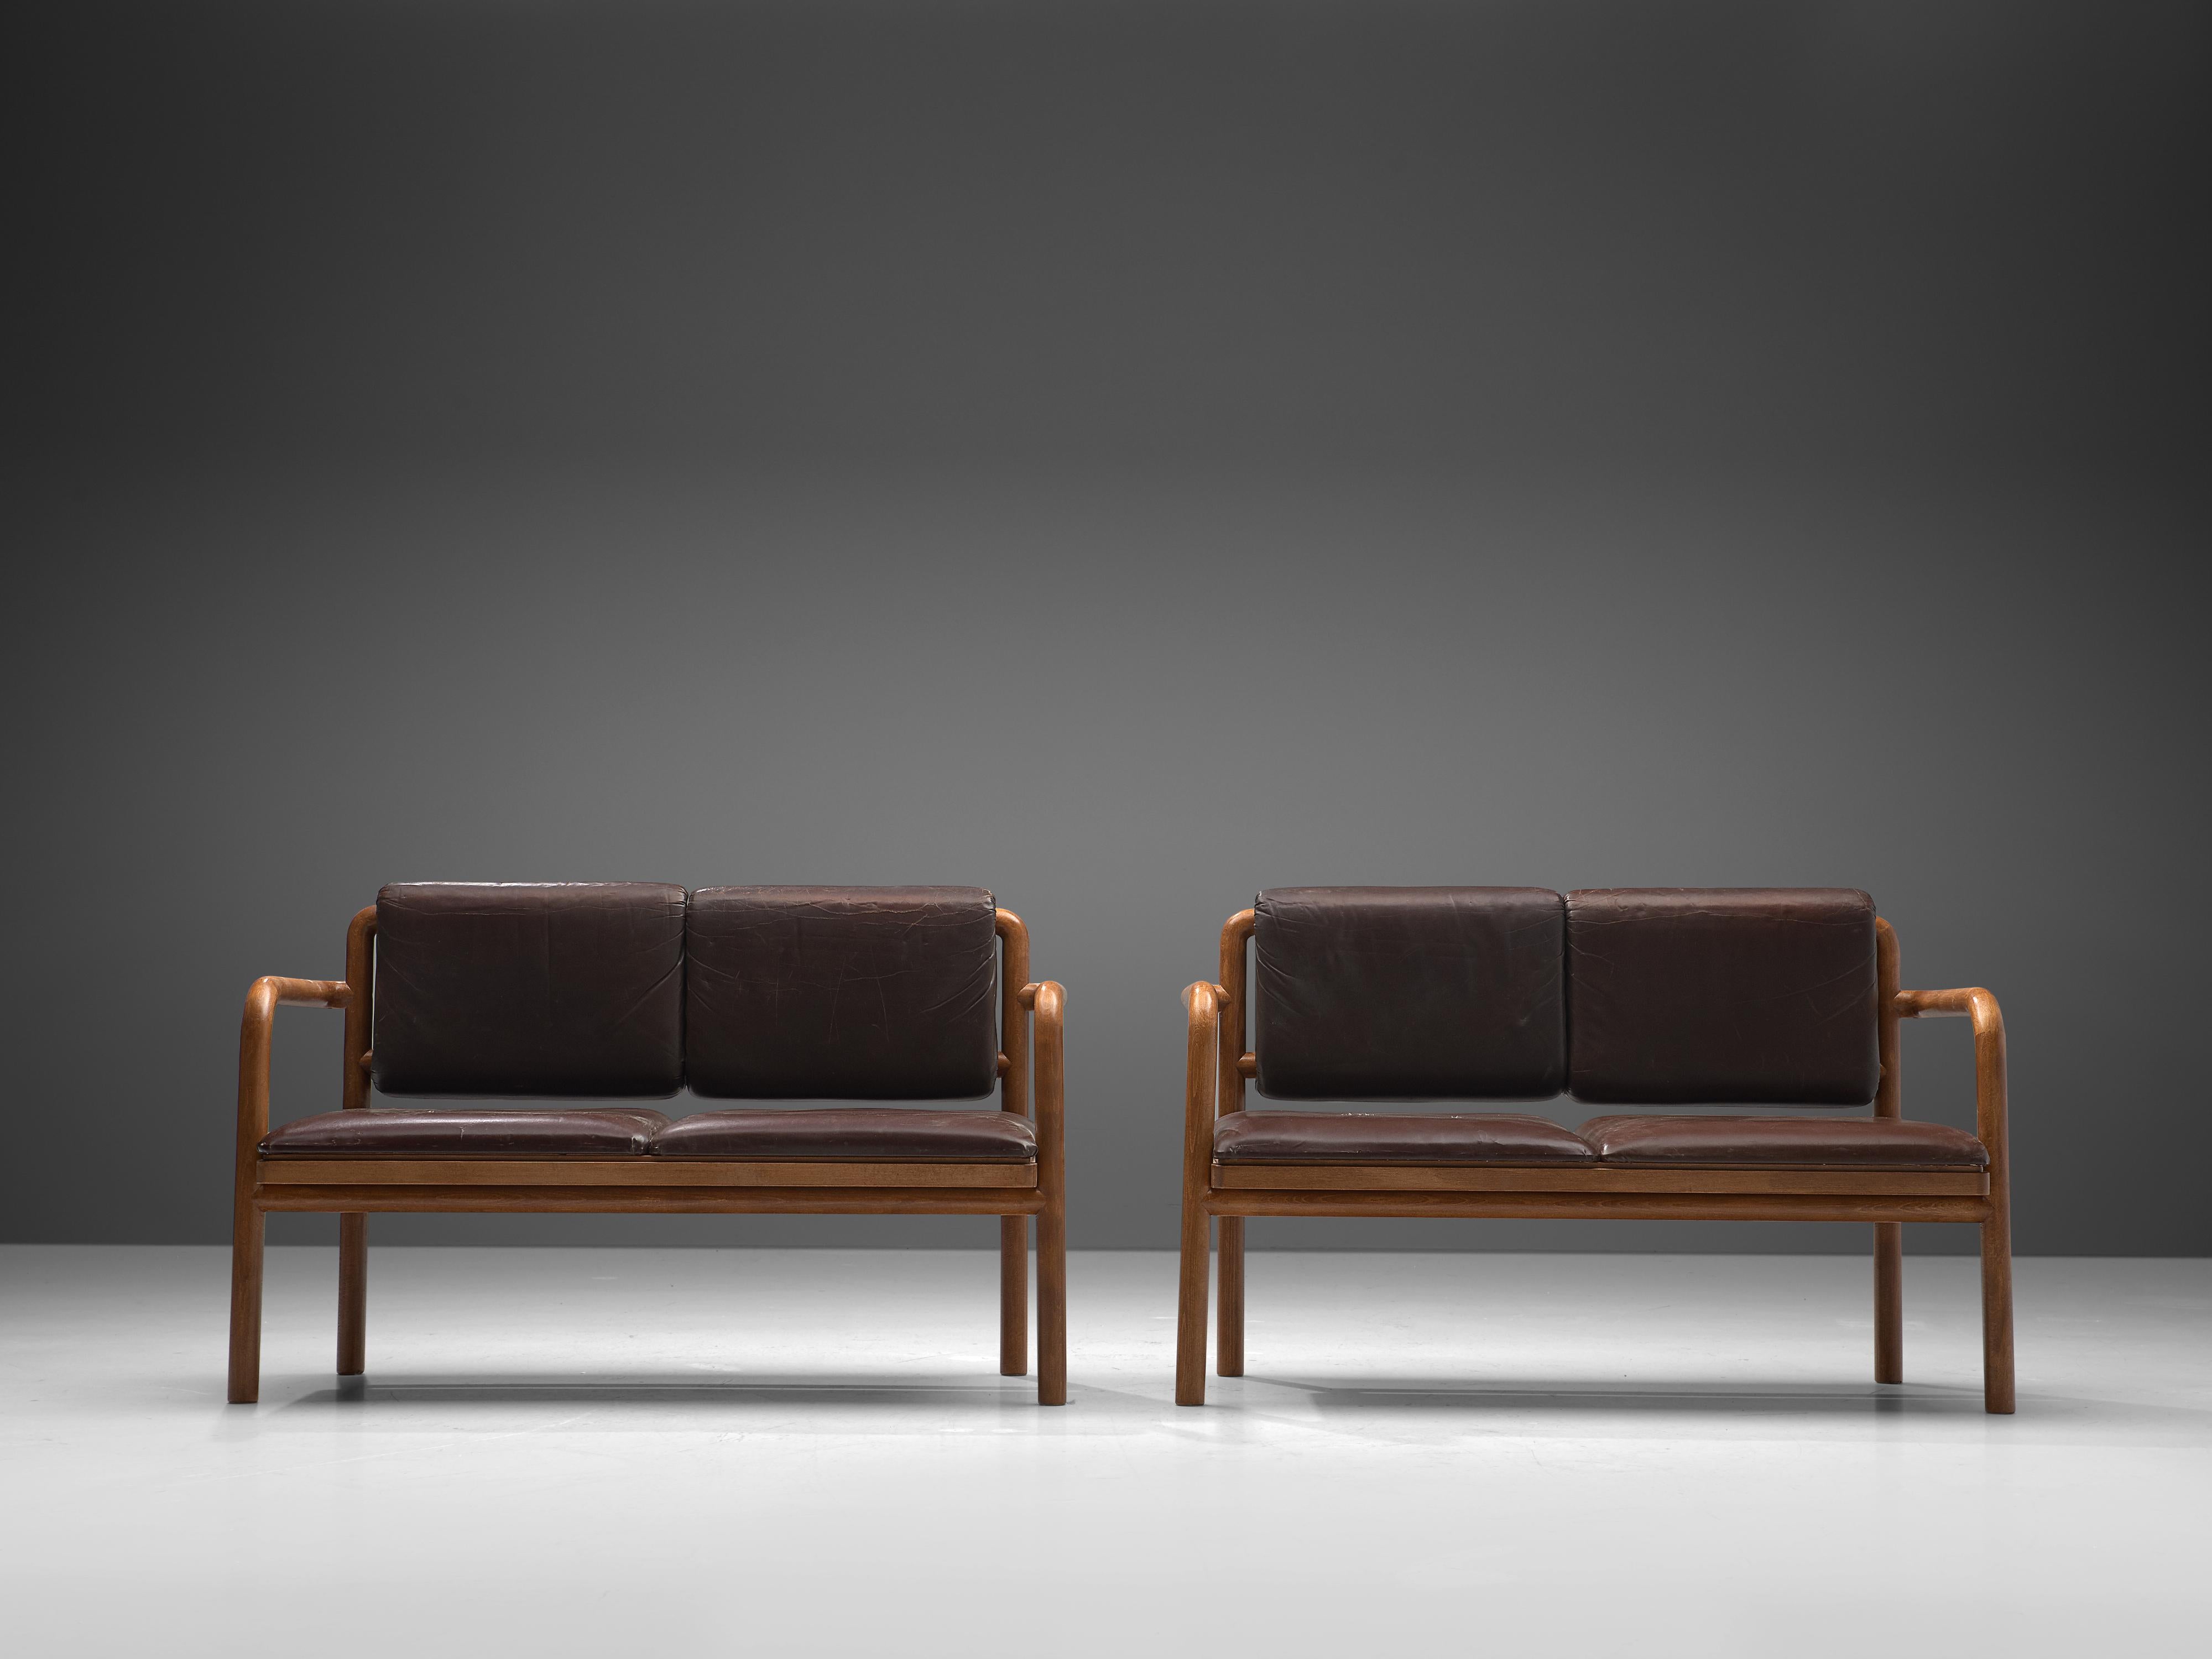 TON, benches, bentwood, faux leather, Czech Republic, 1960s

These benches are manufactured by TON in the 1960s. The benches have a circular bentwood frame with striking round forms. Seat and backrest are upholstered in brown leatherette.  

TON was